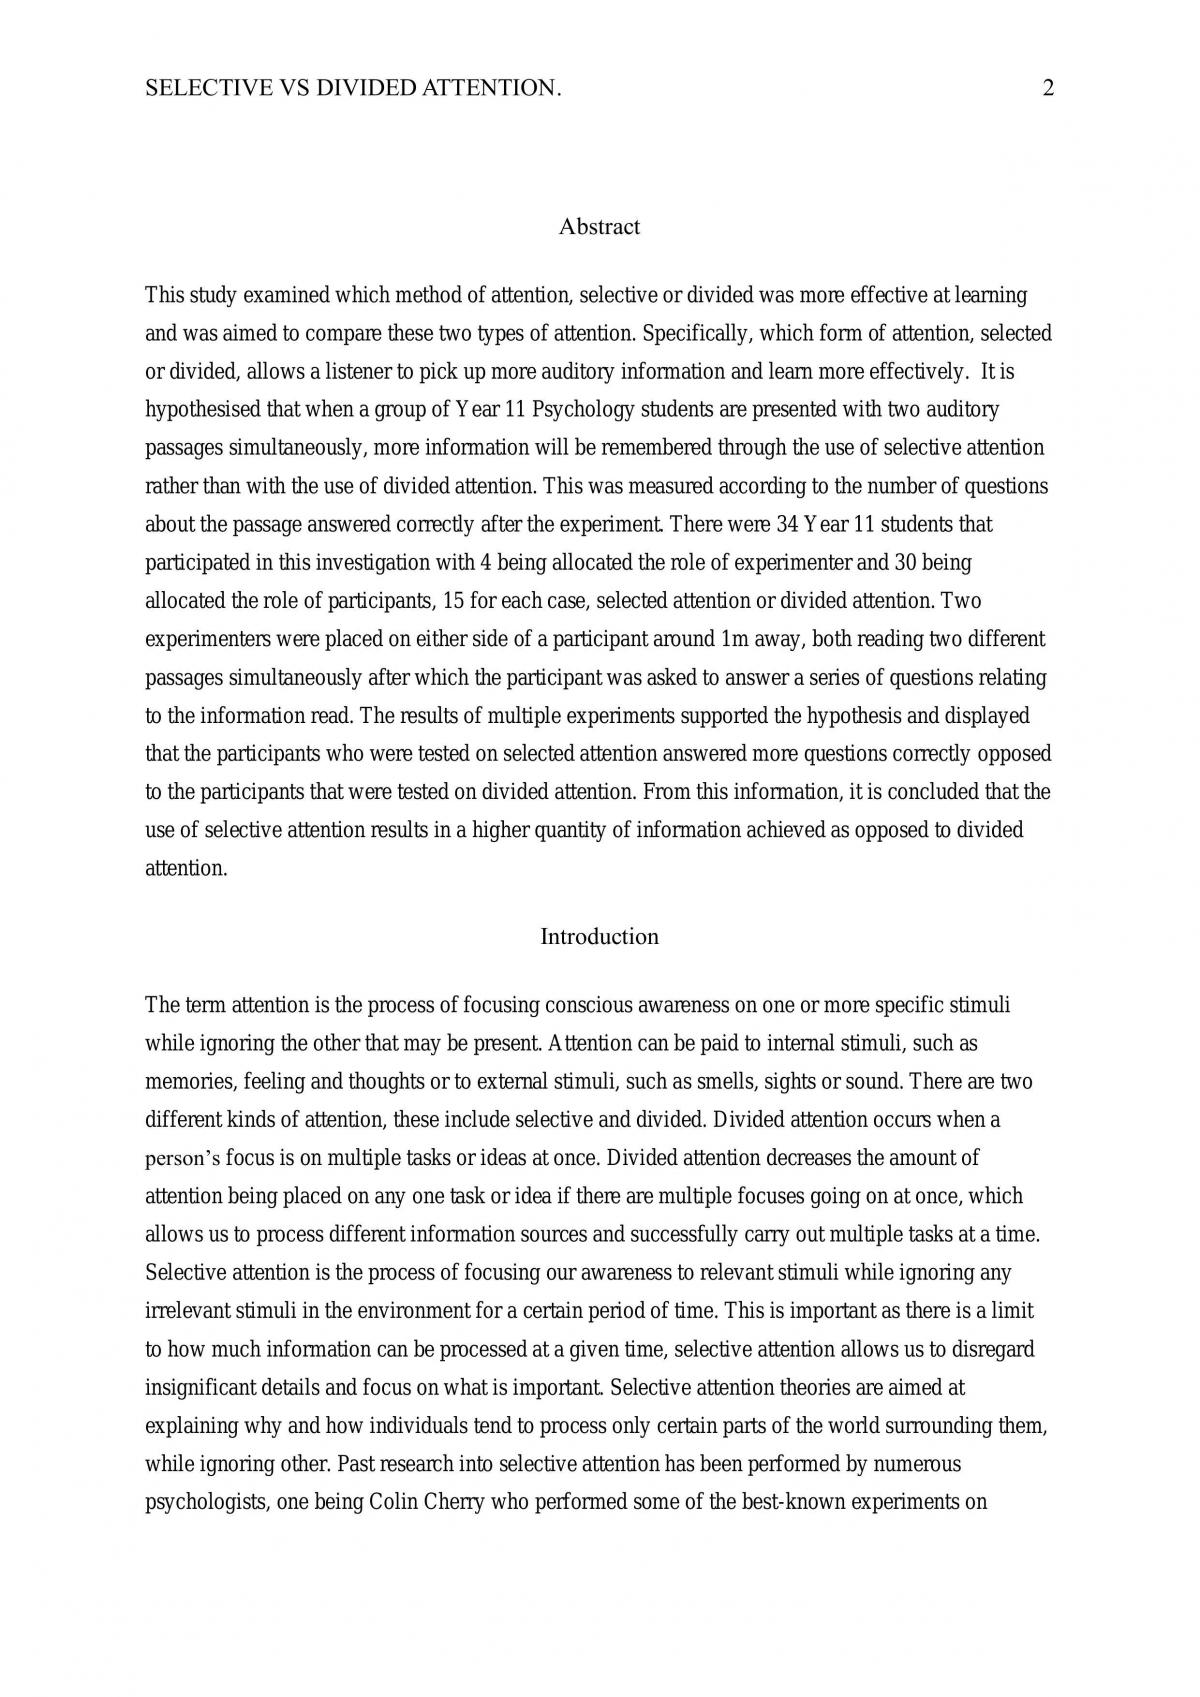 How Selected And Divided Attention Effects Learning - Page 2